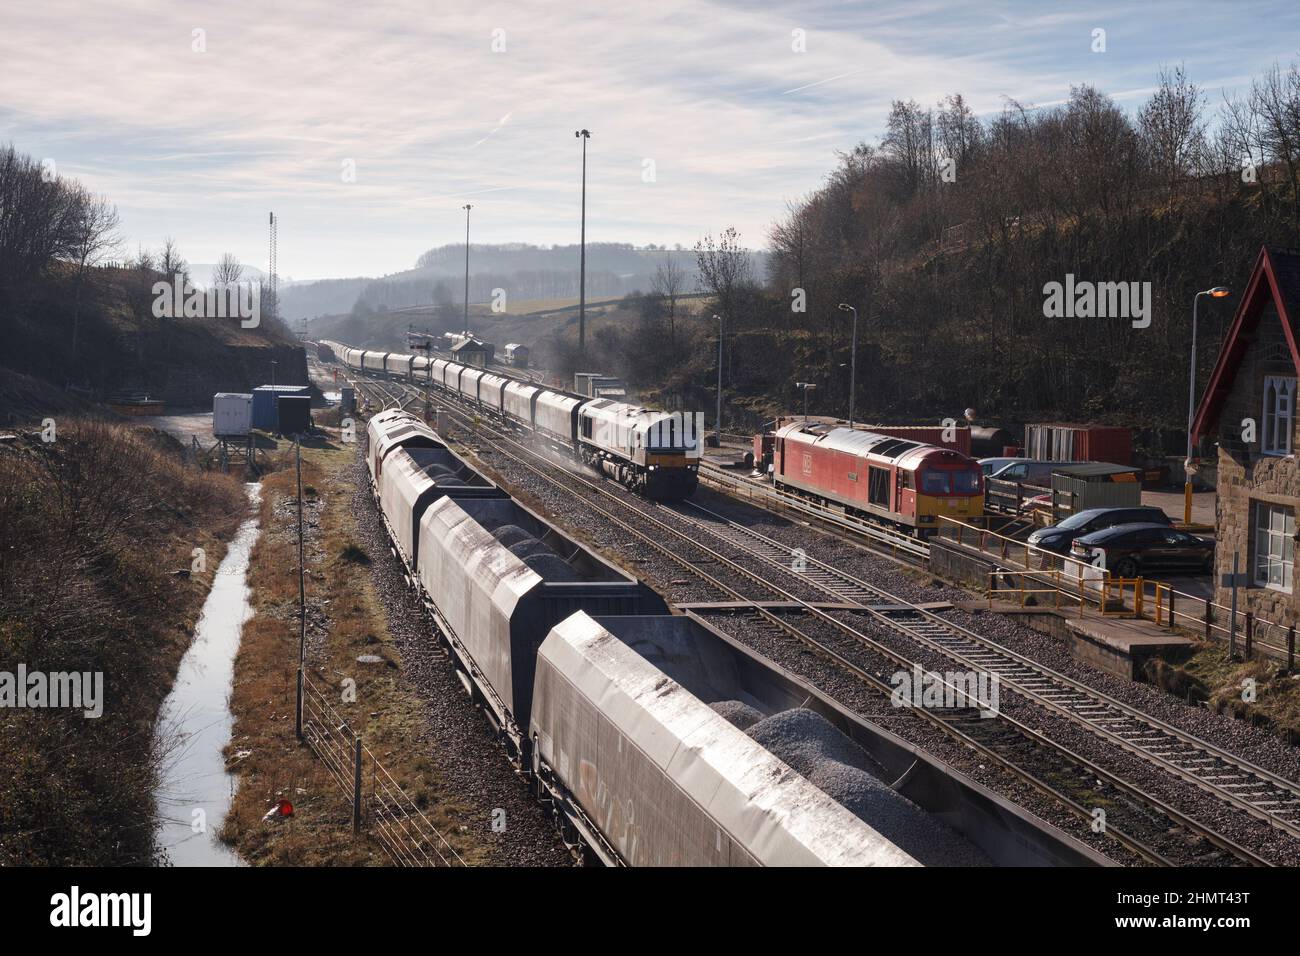 Freight trains at  Peak Forest, Derbyshire with a GB Railfright class 66 locomotive departing with a heavy aggregates train with the sanders working Stock Photo